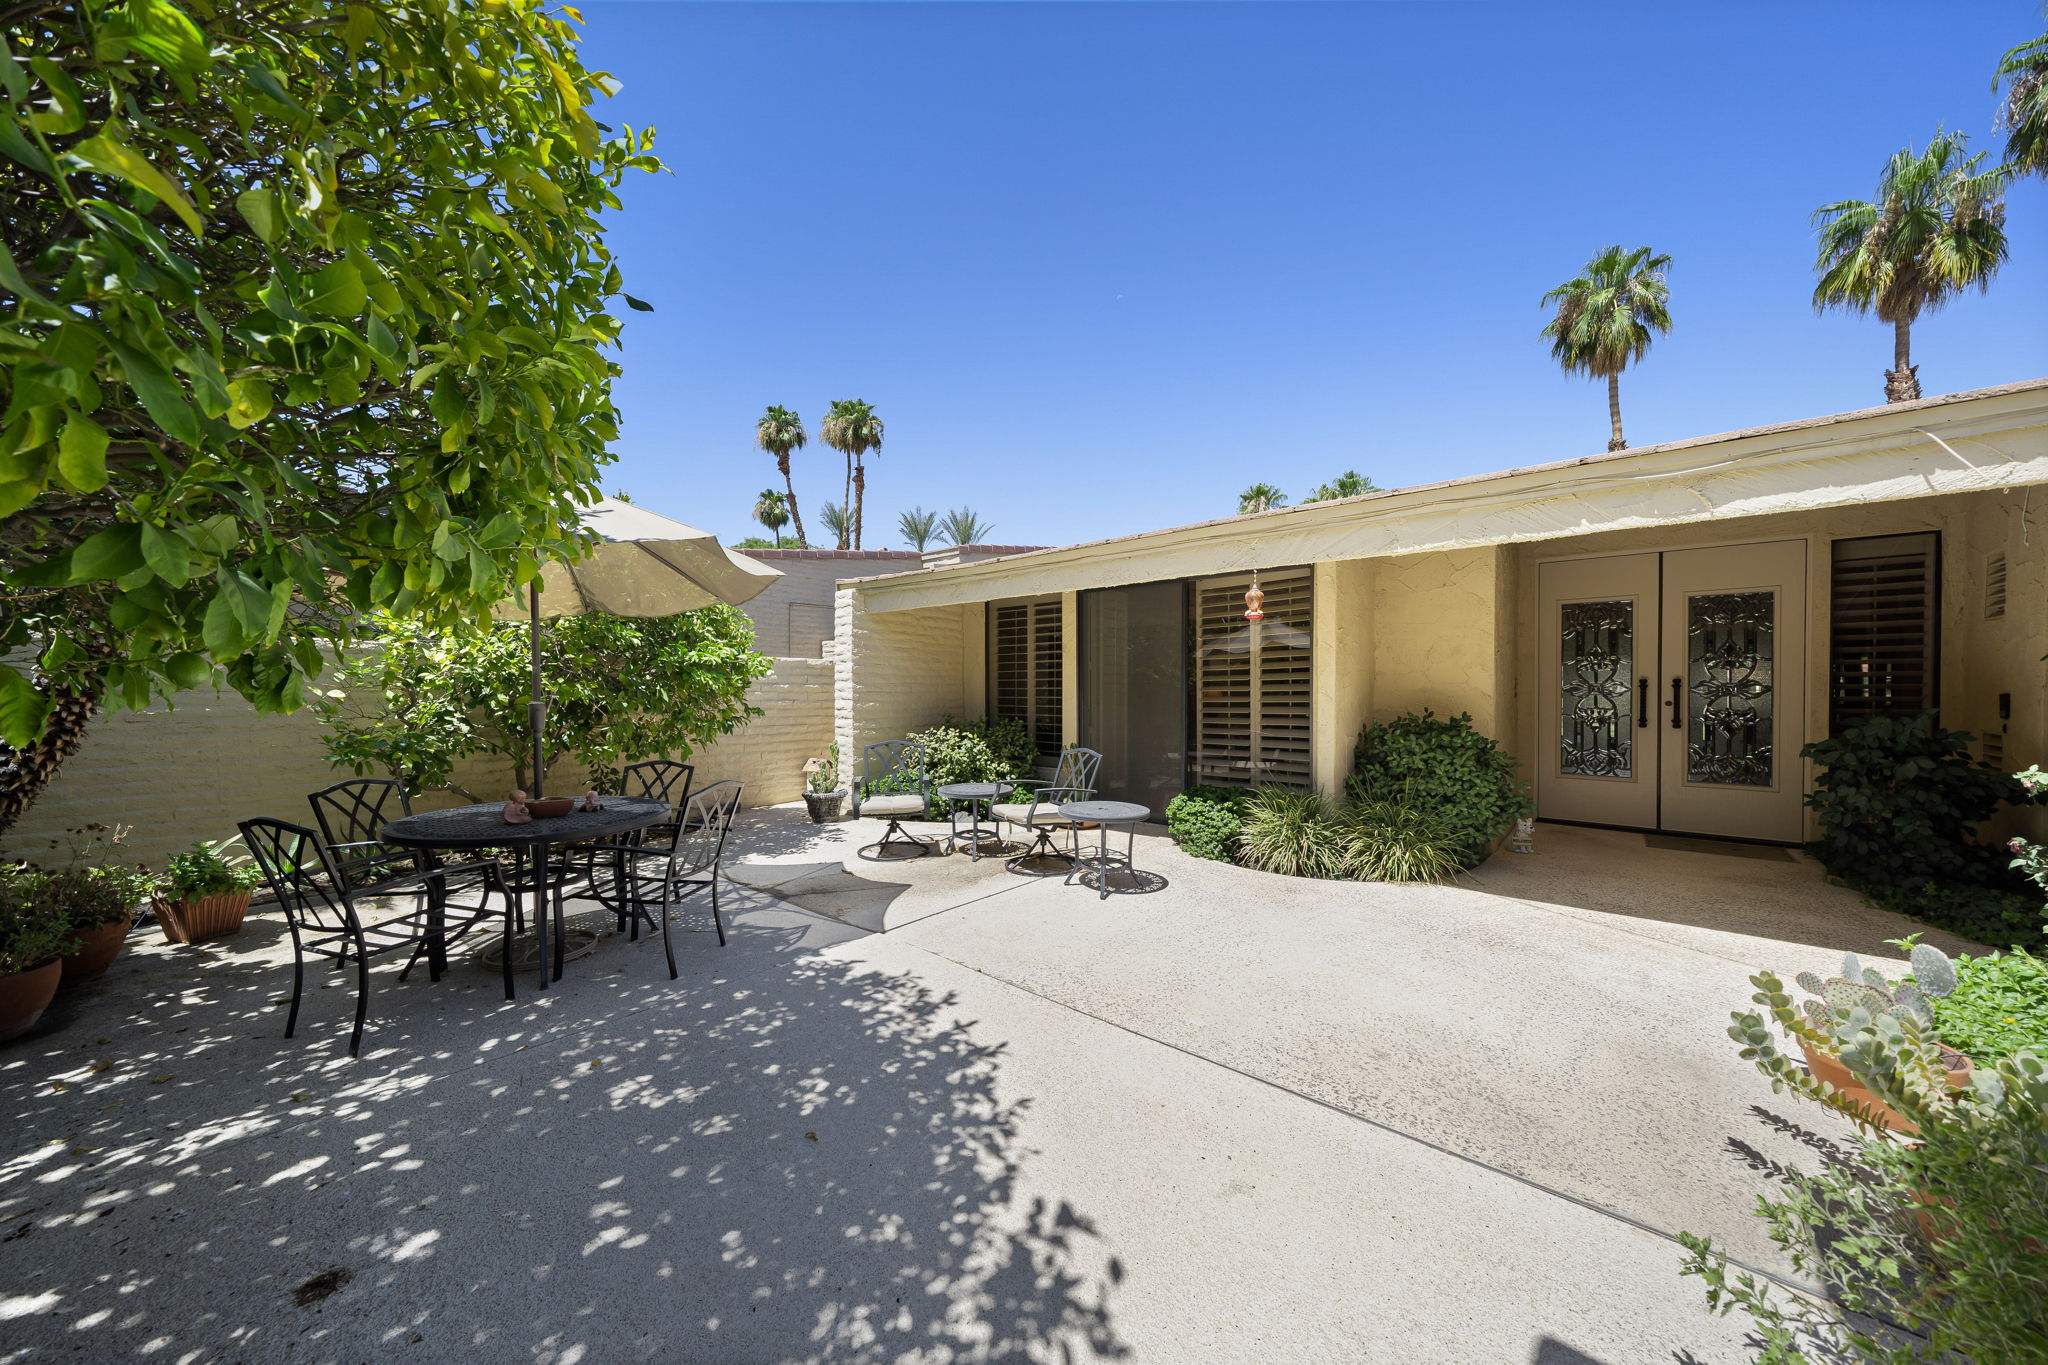  44835 Guadalupe Dr, Indian Wells, CA 92210, US Photo 2